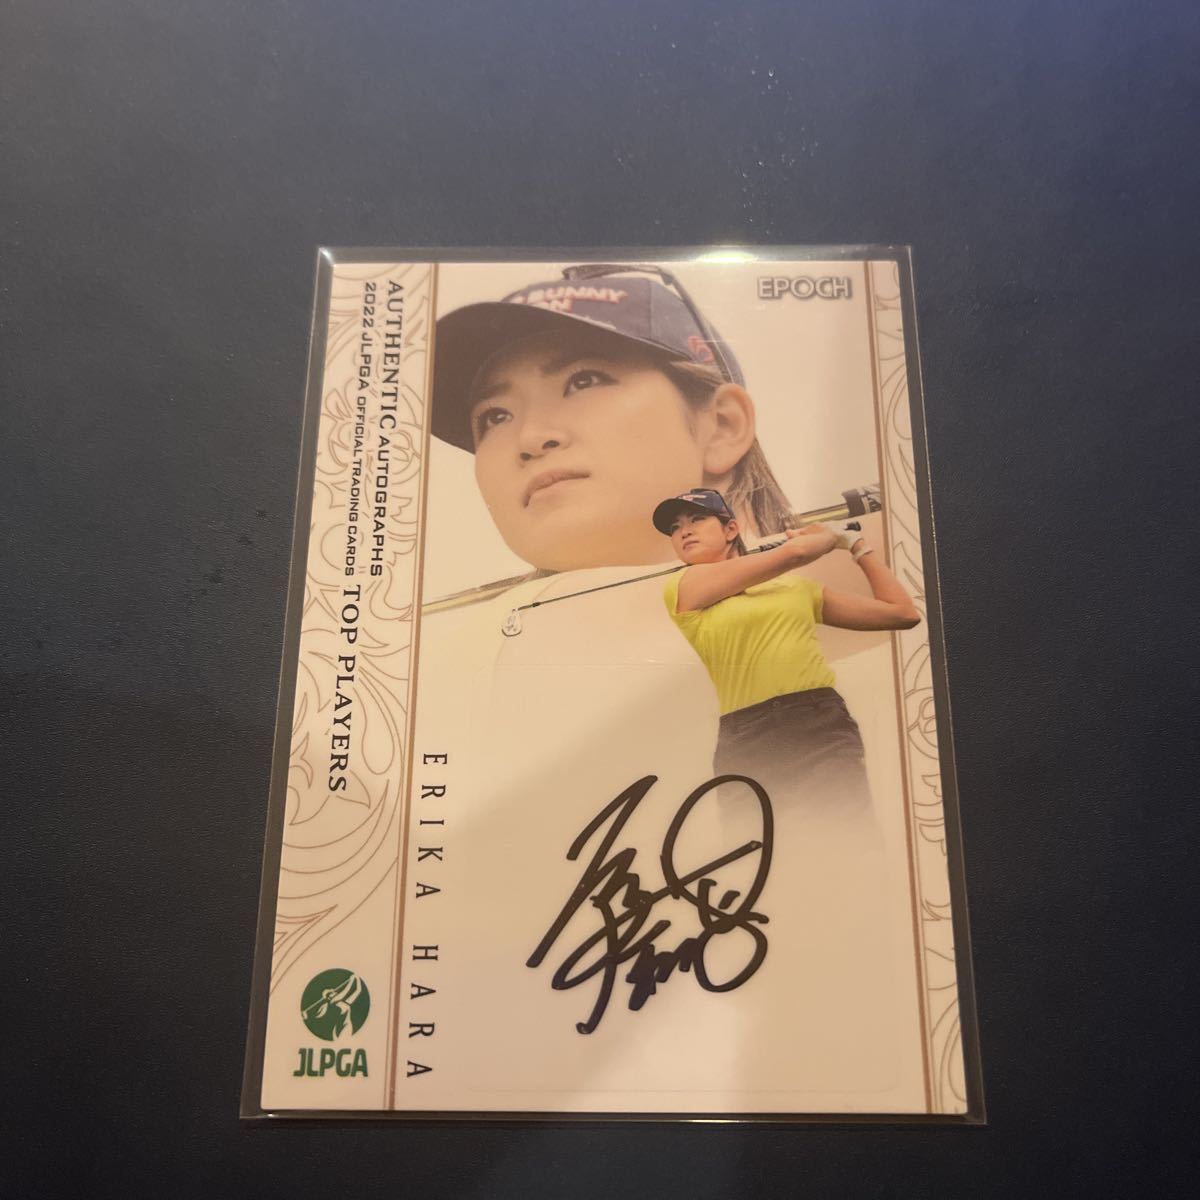 2022 EPOCH JLPGA OFFICIAL TRADING CARDS TOP PLAYERS 原英莉花直筆 